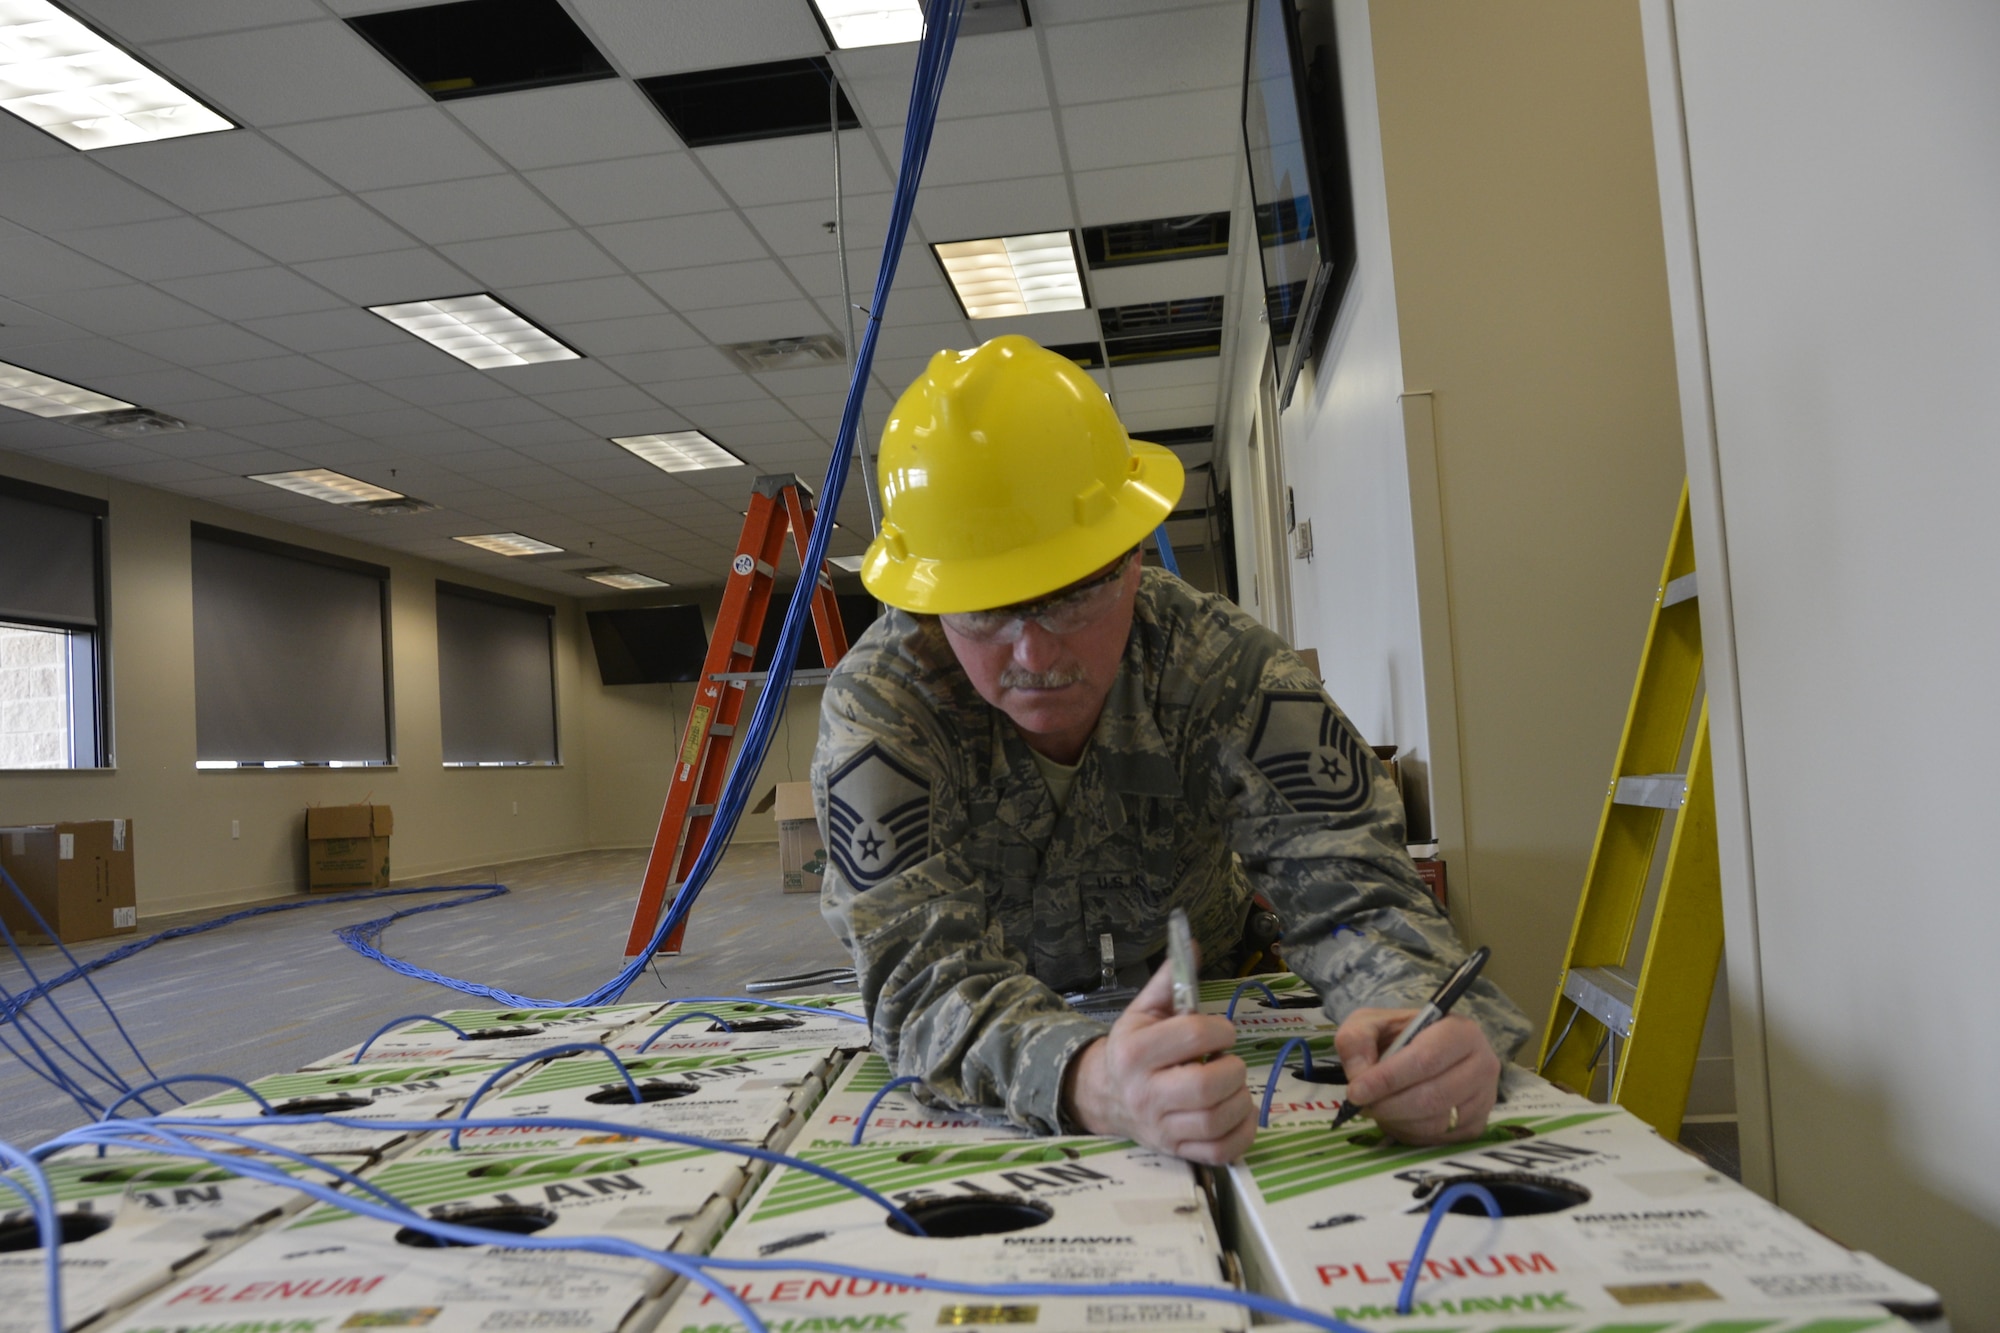 Master Sgt. Keith Brown, cyber transport specialist with the 241st Engineering Installation Squadron, Chattanooga, Tenn., marks the order of boxes of copper cable prior to installation. Brown is part of a group of seven Airmen from the 241st EIS who deployed here to assist the 1st AF (AFNORTH) enterprise to restore its communications and computer capabilities following the devastating effects of Hurricane Michael Oct. 10, 2018. (Air Force photo by Mary McHale)